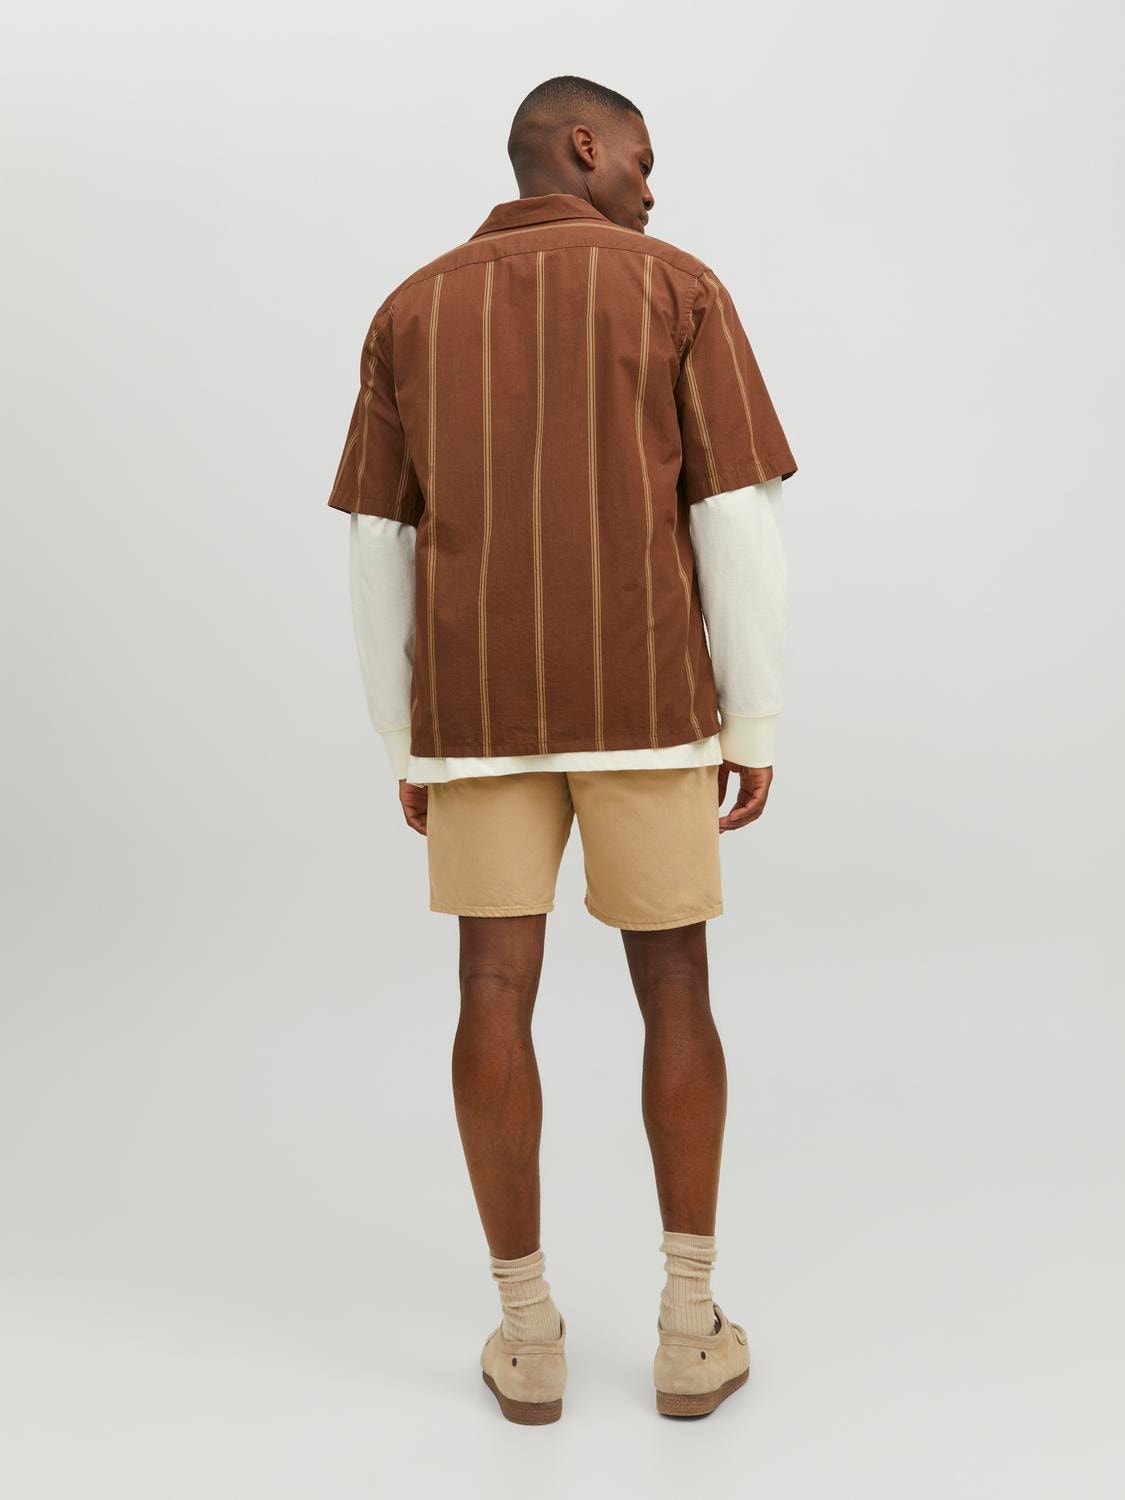 Jack & Jones RDD Relaxed Fit Resort shirt -Cocoa Brown - 12232206